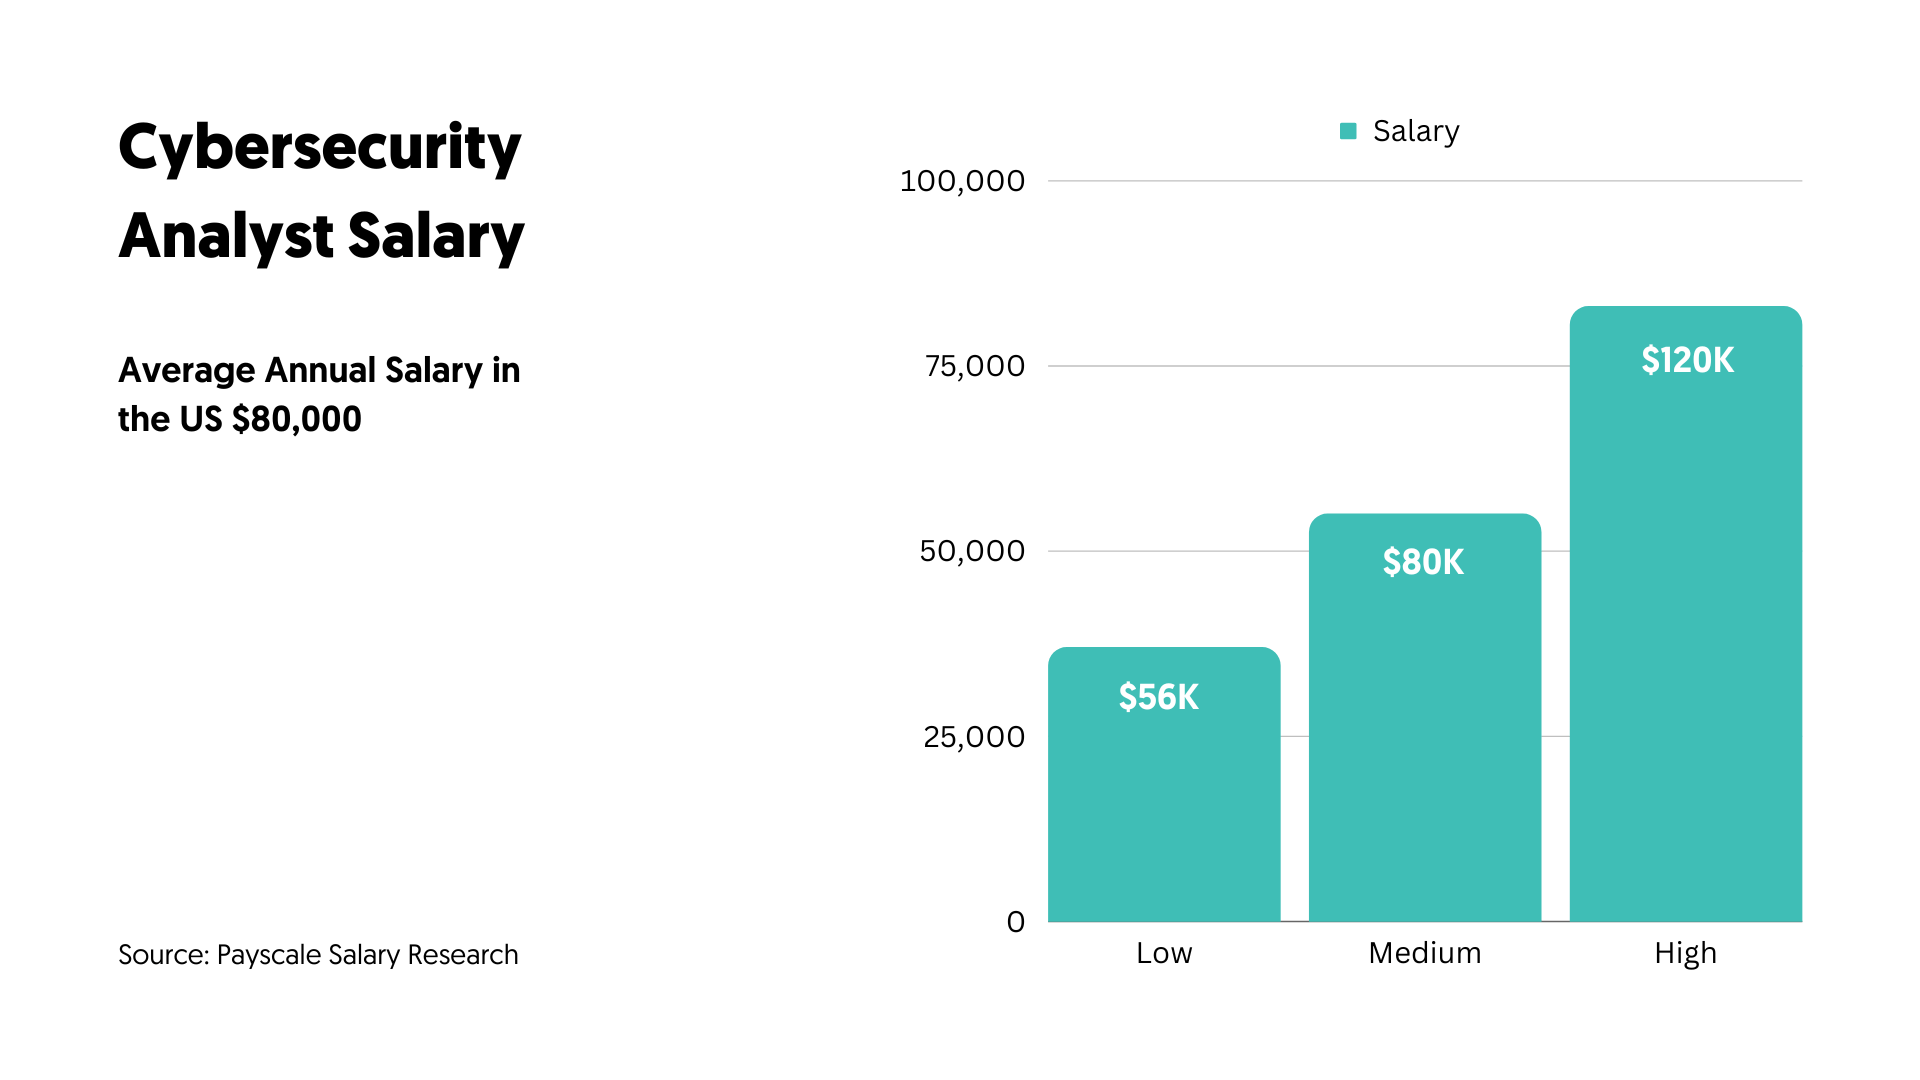 Cybersecurity Analyst Salary